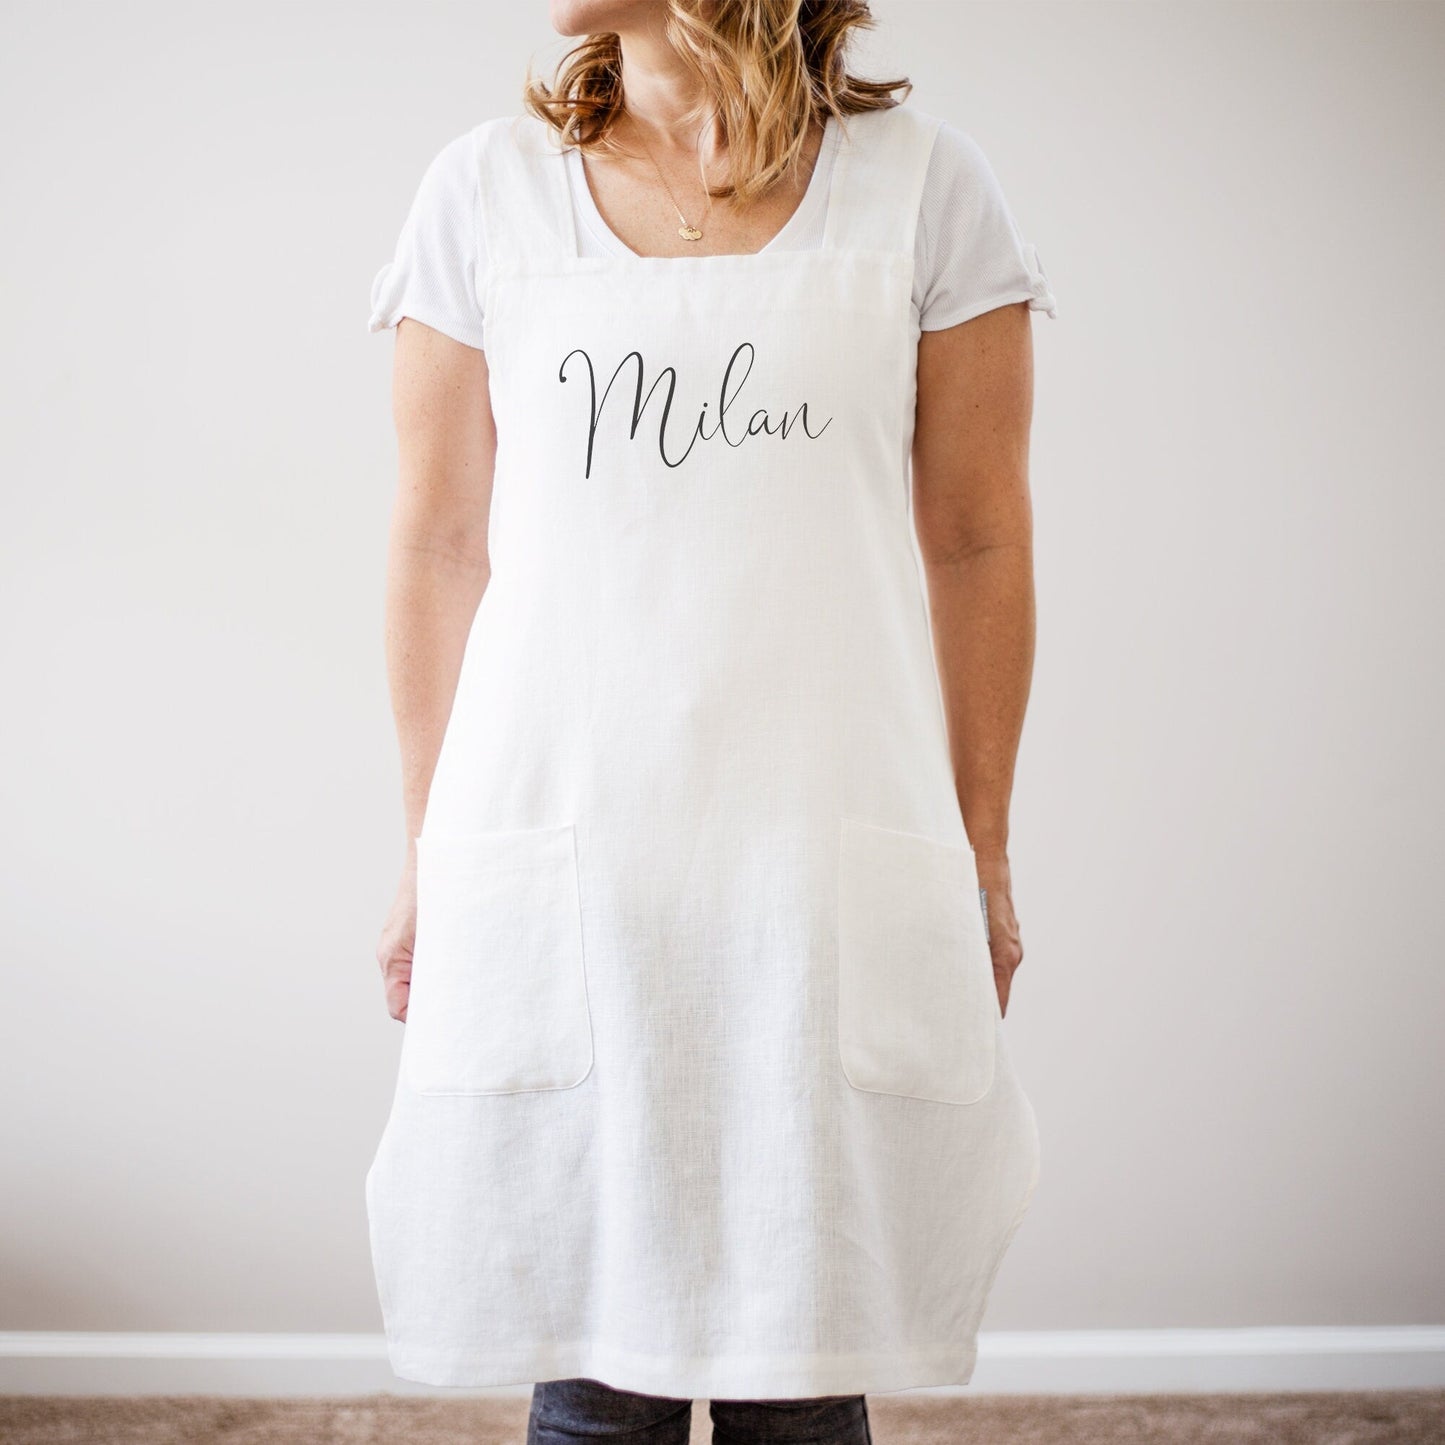 Personalized Pinafore Linen Apron | Japanese Linen Apron | Japanese Cross Back Apron | No Ties Linen Aprons for Women | No Ties Linen Apron